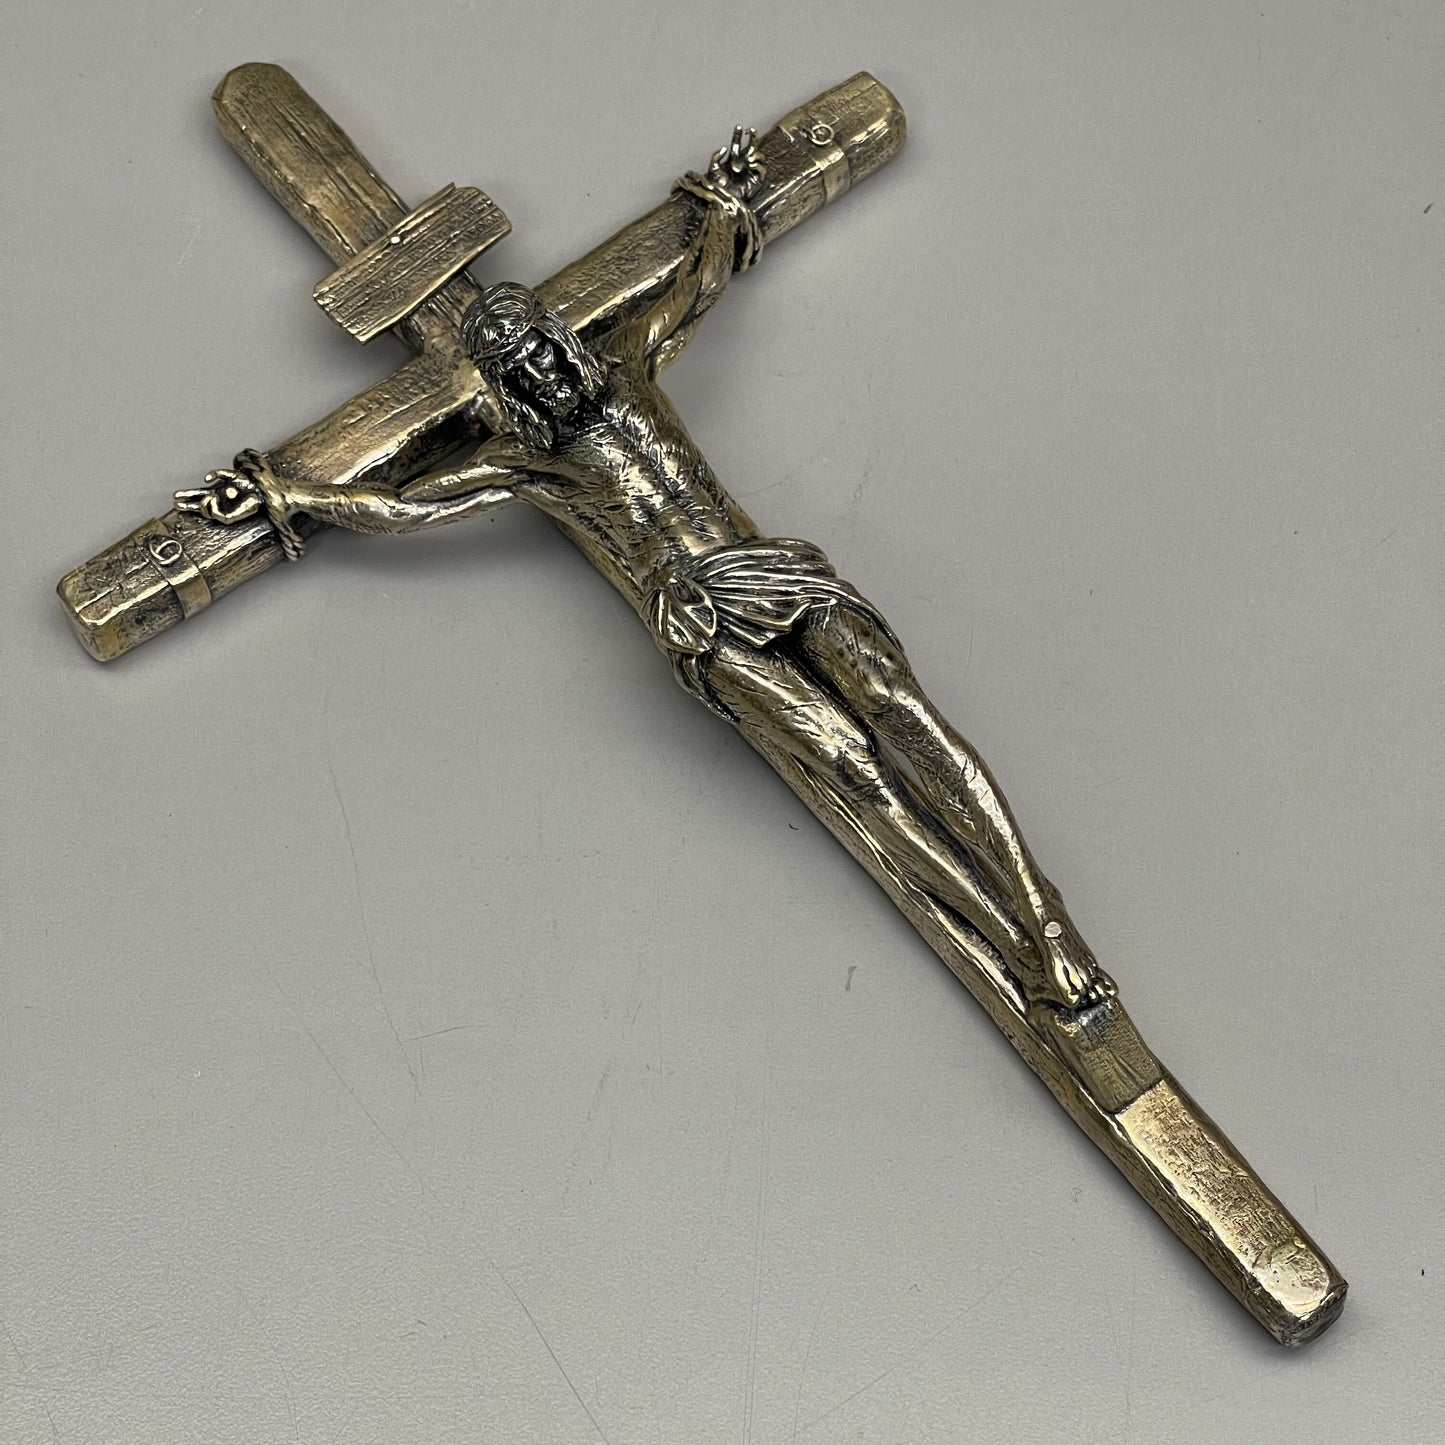 SILVER STATUES The Price He Paid XL 30+ Troy oz .925 Sterling Silver Jesus on the Cross Crucifix (New)